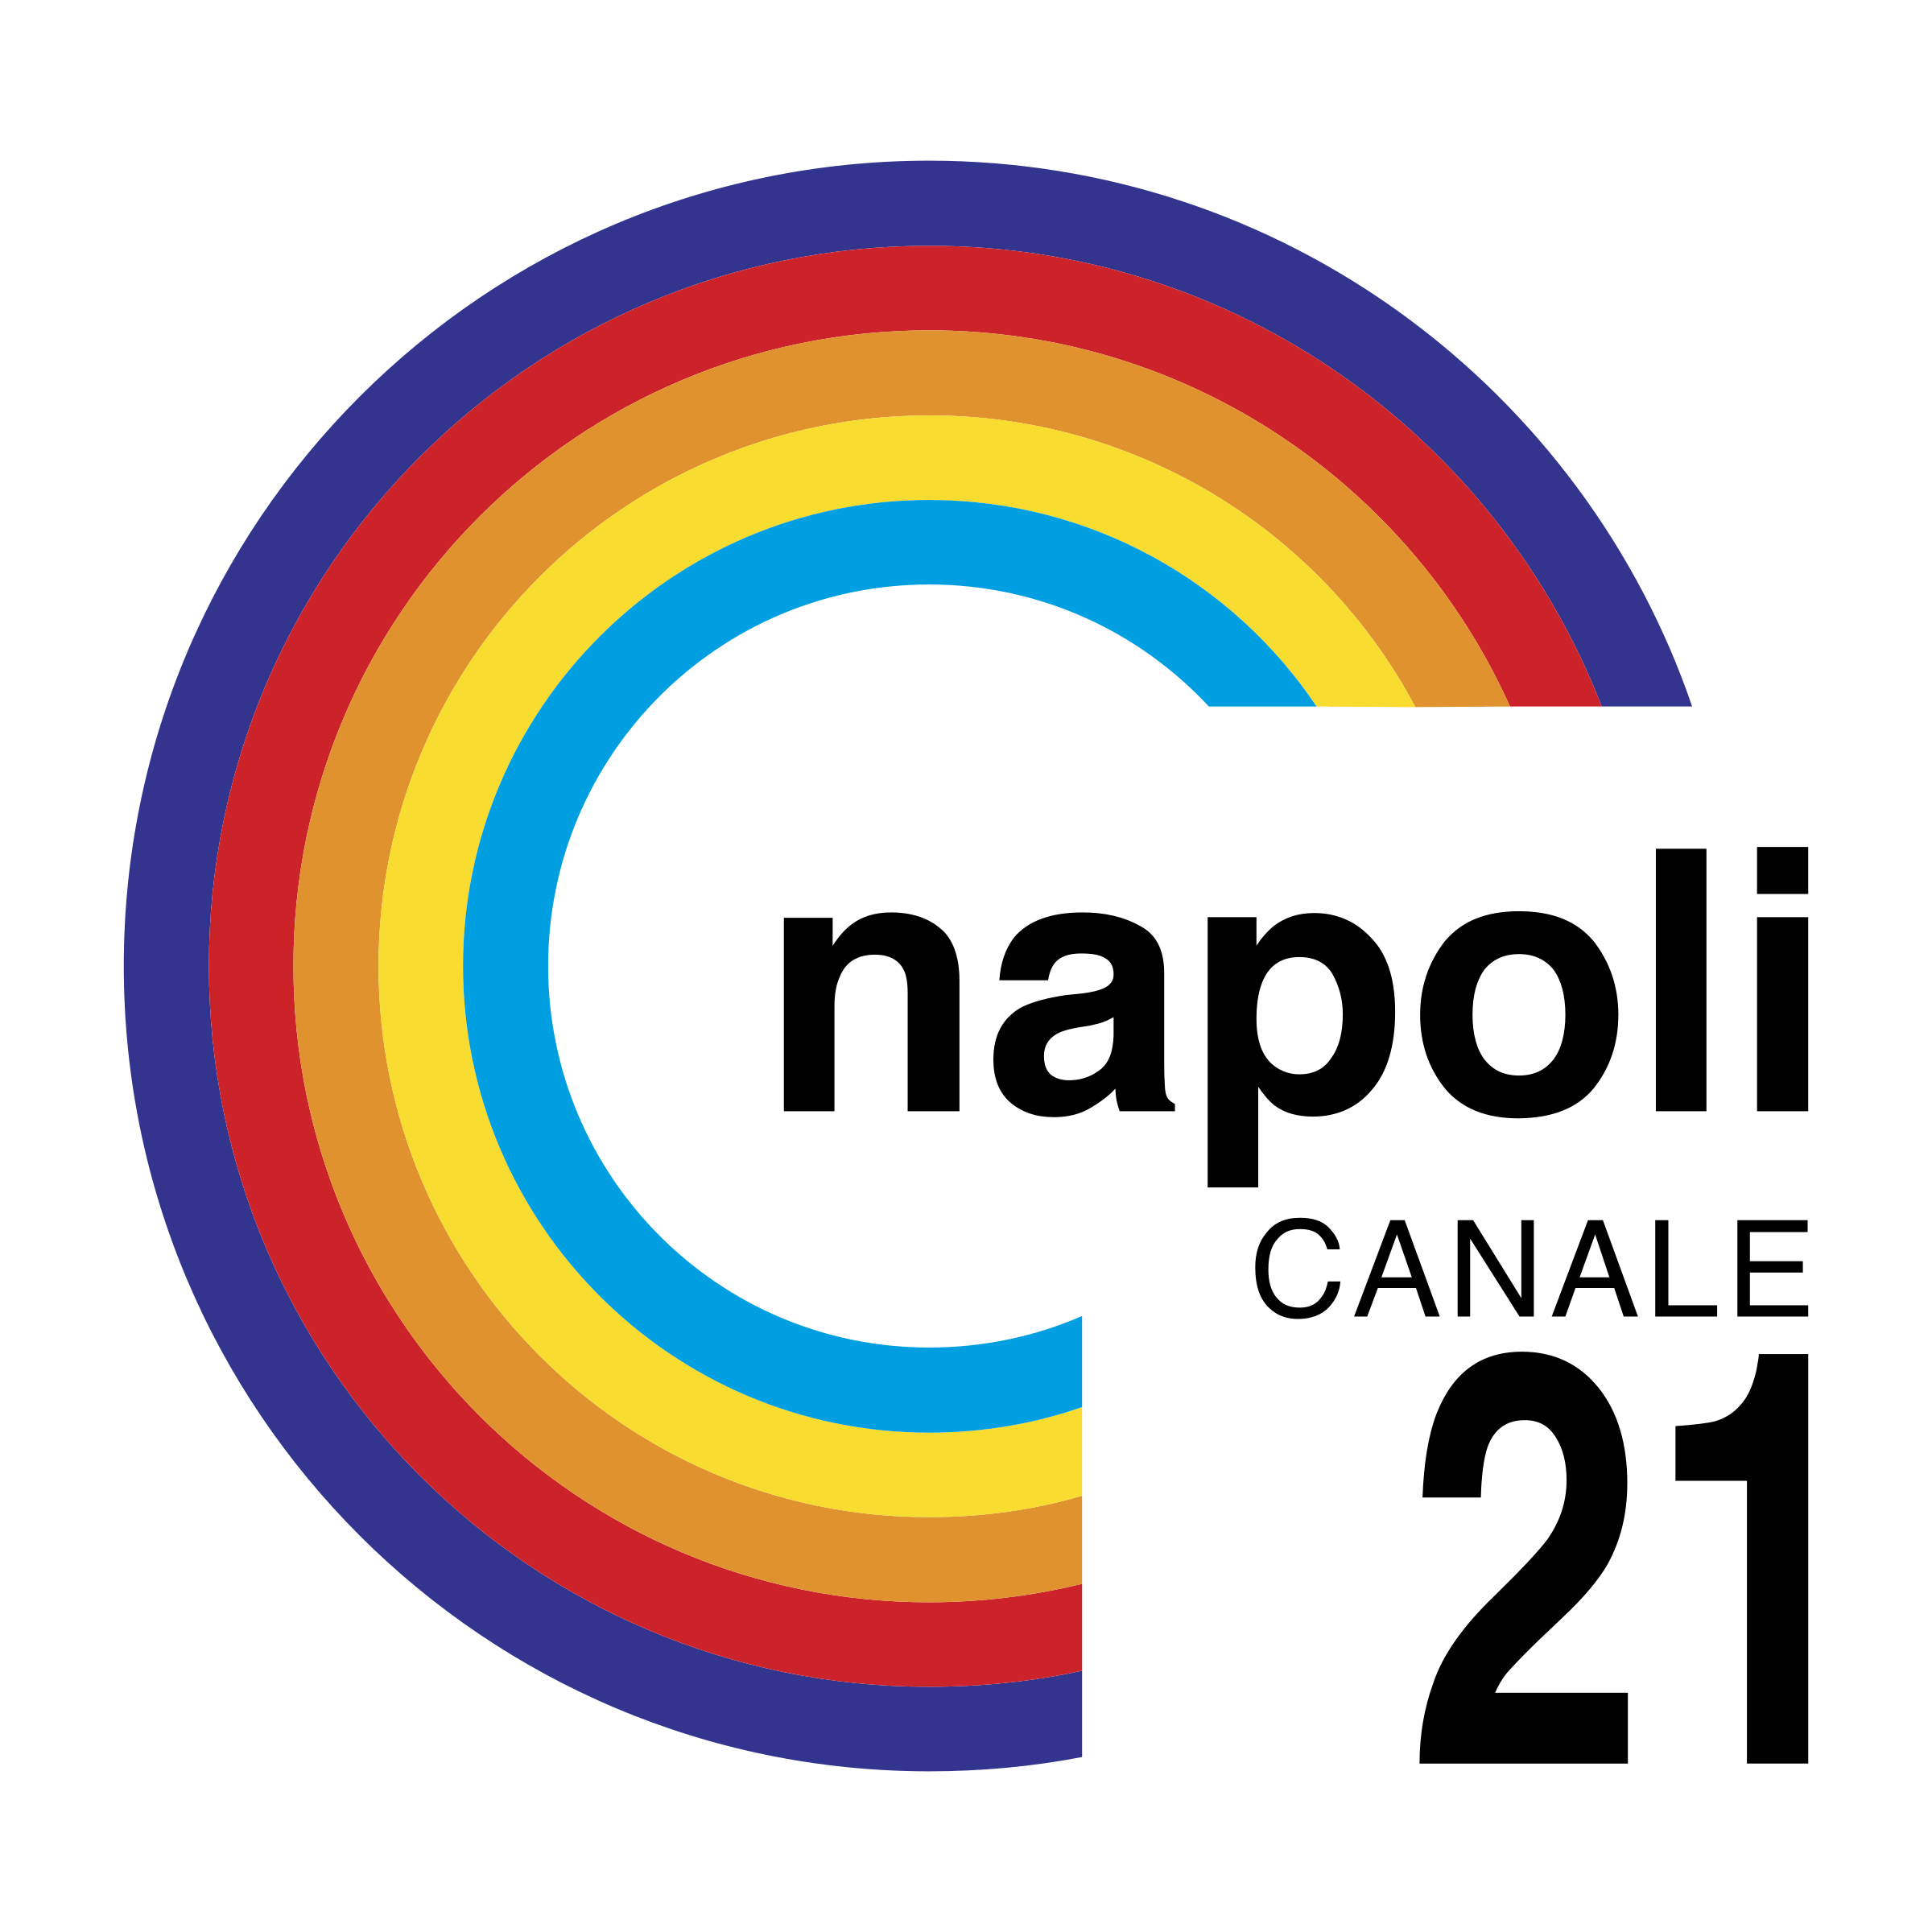 Canali Logo - Napoli Canale 21 Logo PNG Transparent & SVG Vector - Freebie Supply